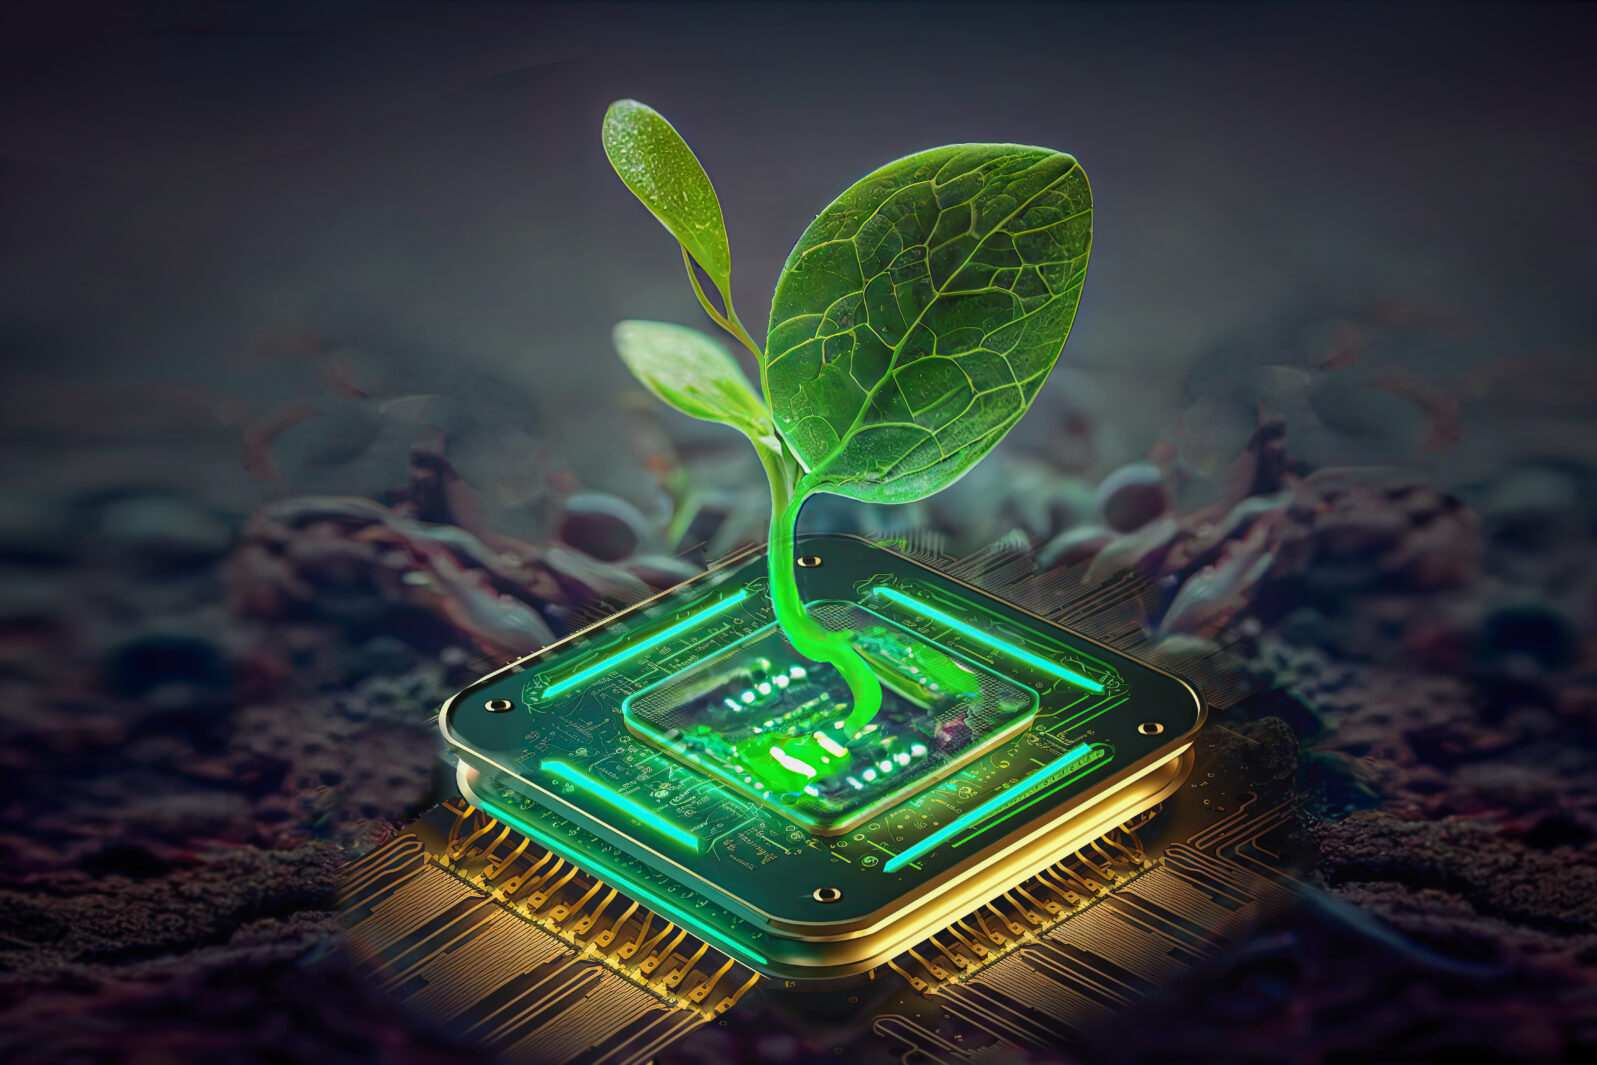 A green sprout sprouts from the microprocessor. A symbol of a new startup or business in the IT field of green technologies or biotechnologies. A living beginning in computers and artificial ai